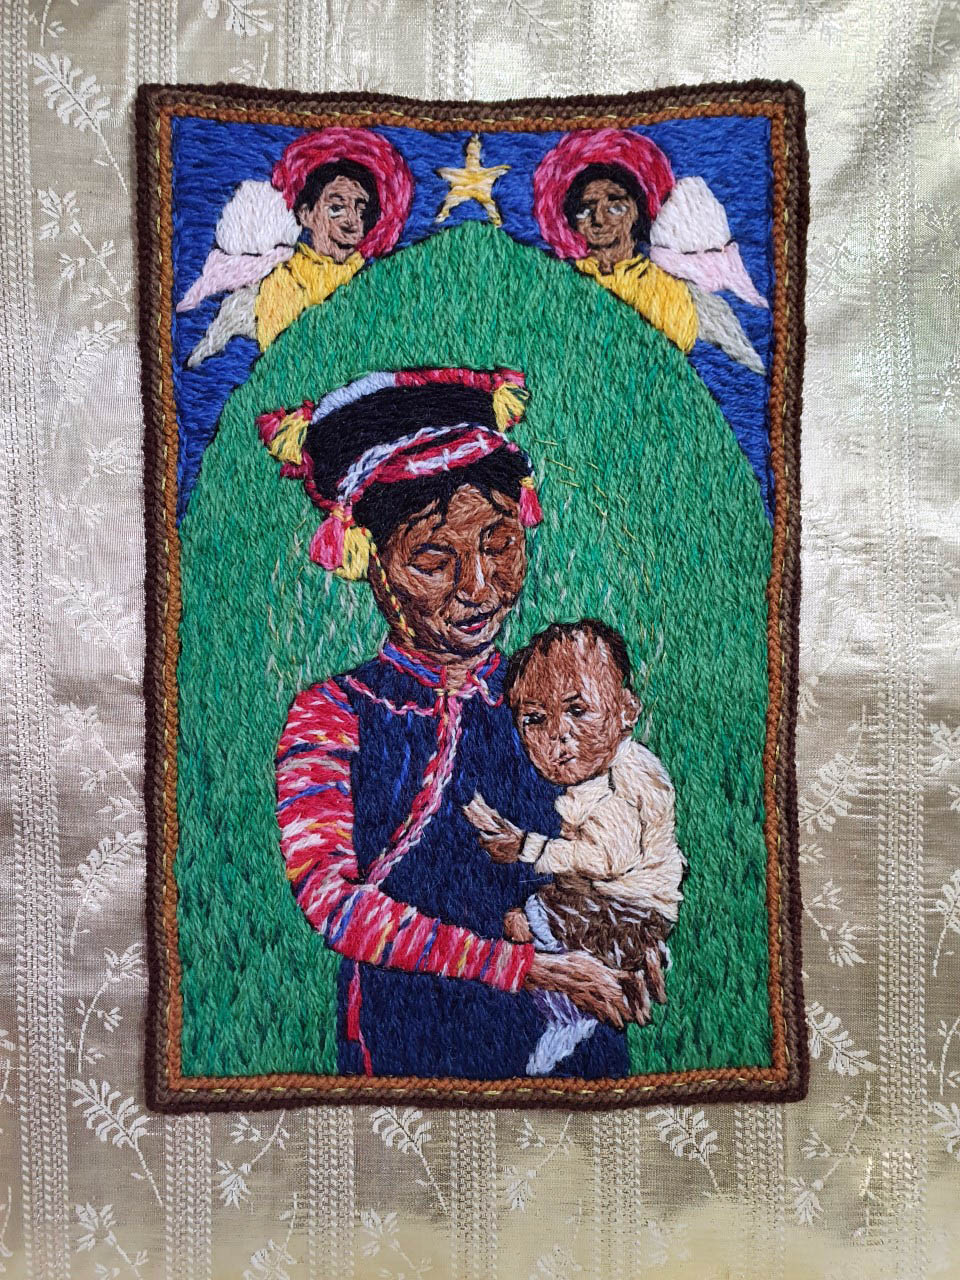 MADONNA AND CHILD by Jane Rylands, Cheshire Borders branch,  freestyle crewel embroidery, hand stitch on tapestry canvas, Rose Bowl competition 2021